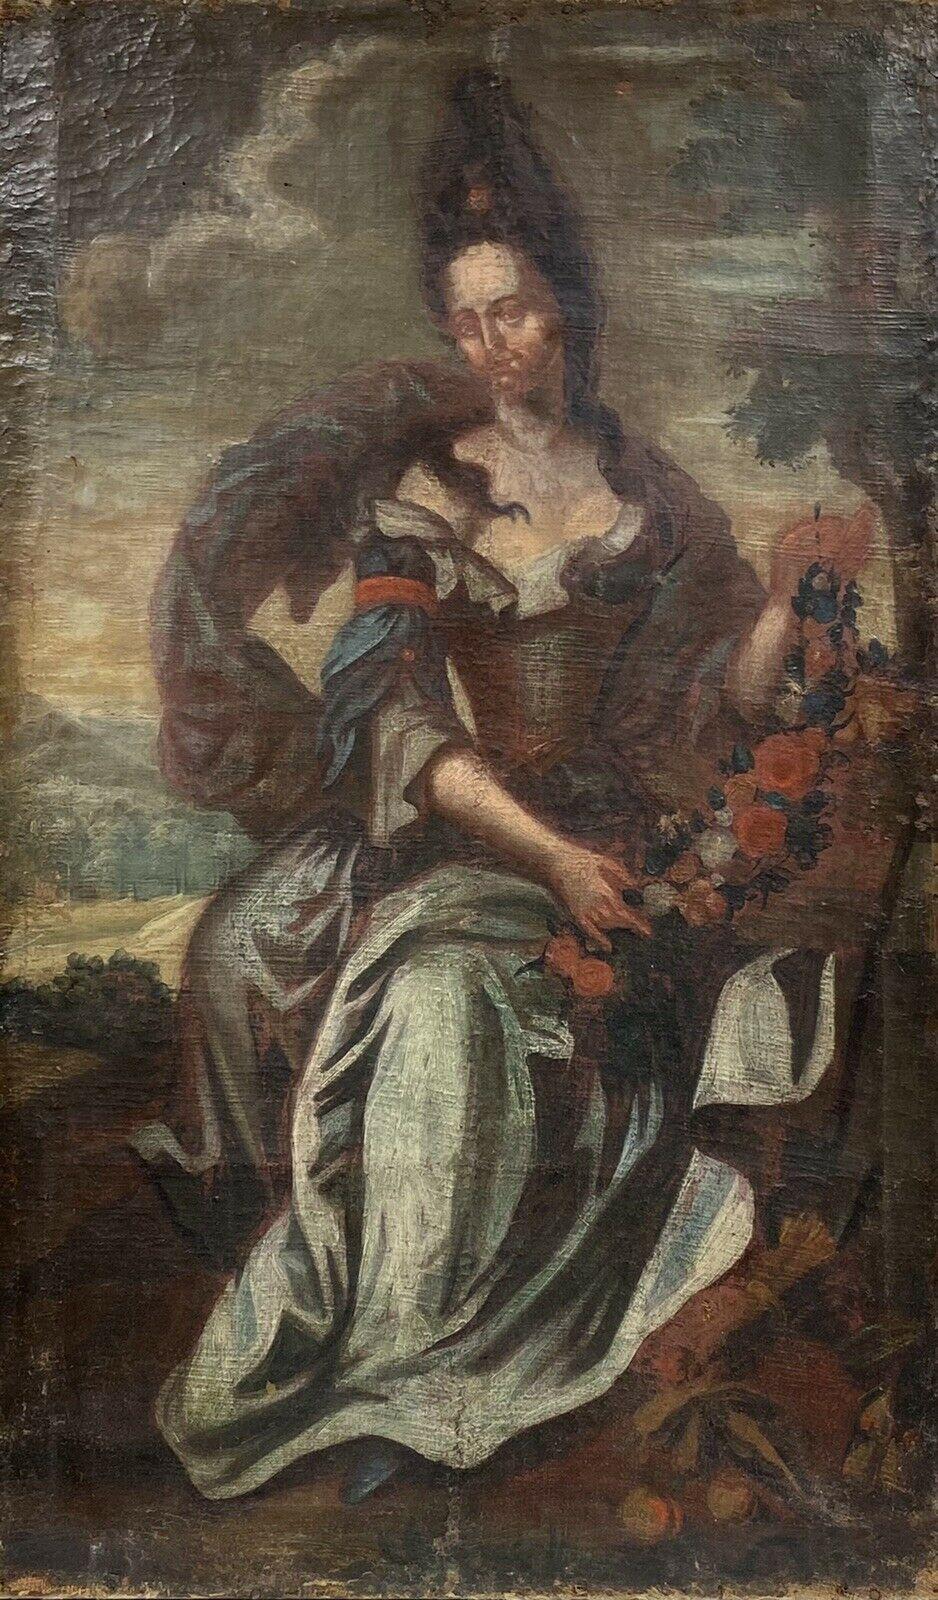 17th CENTURY FRENCH OLD MASTER OIL TO RESTORE - CLASSICAL LADY IN LANDSCAPE